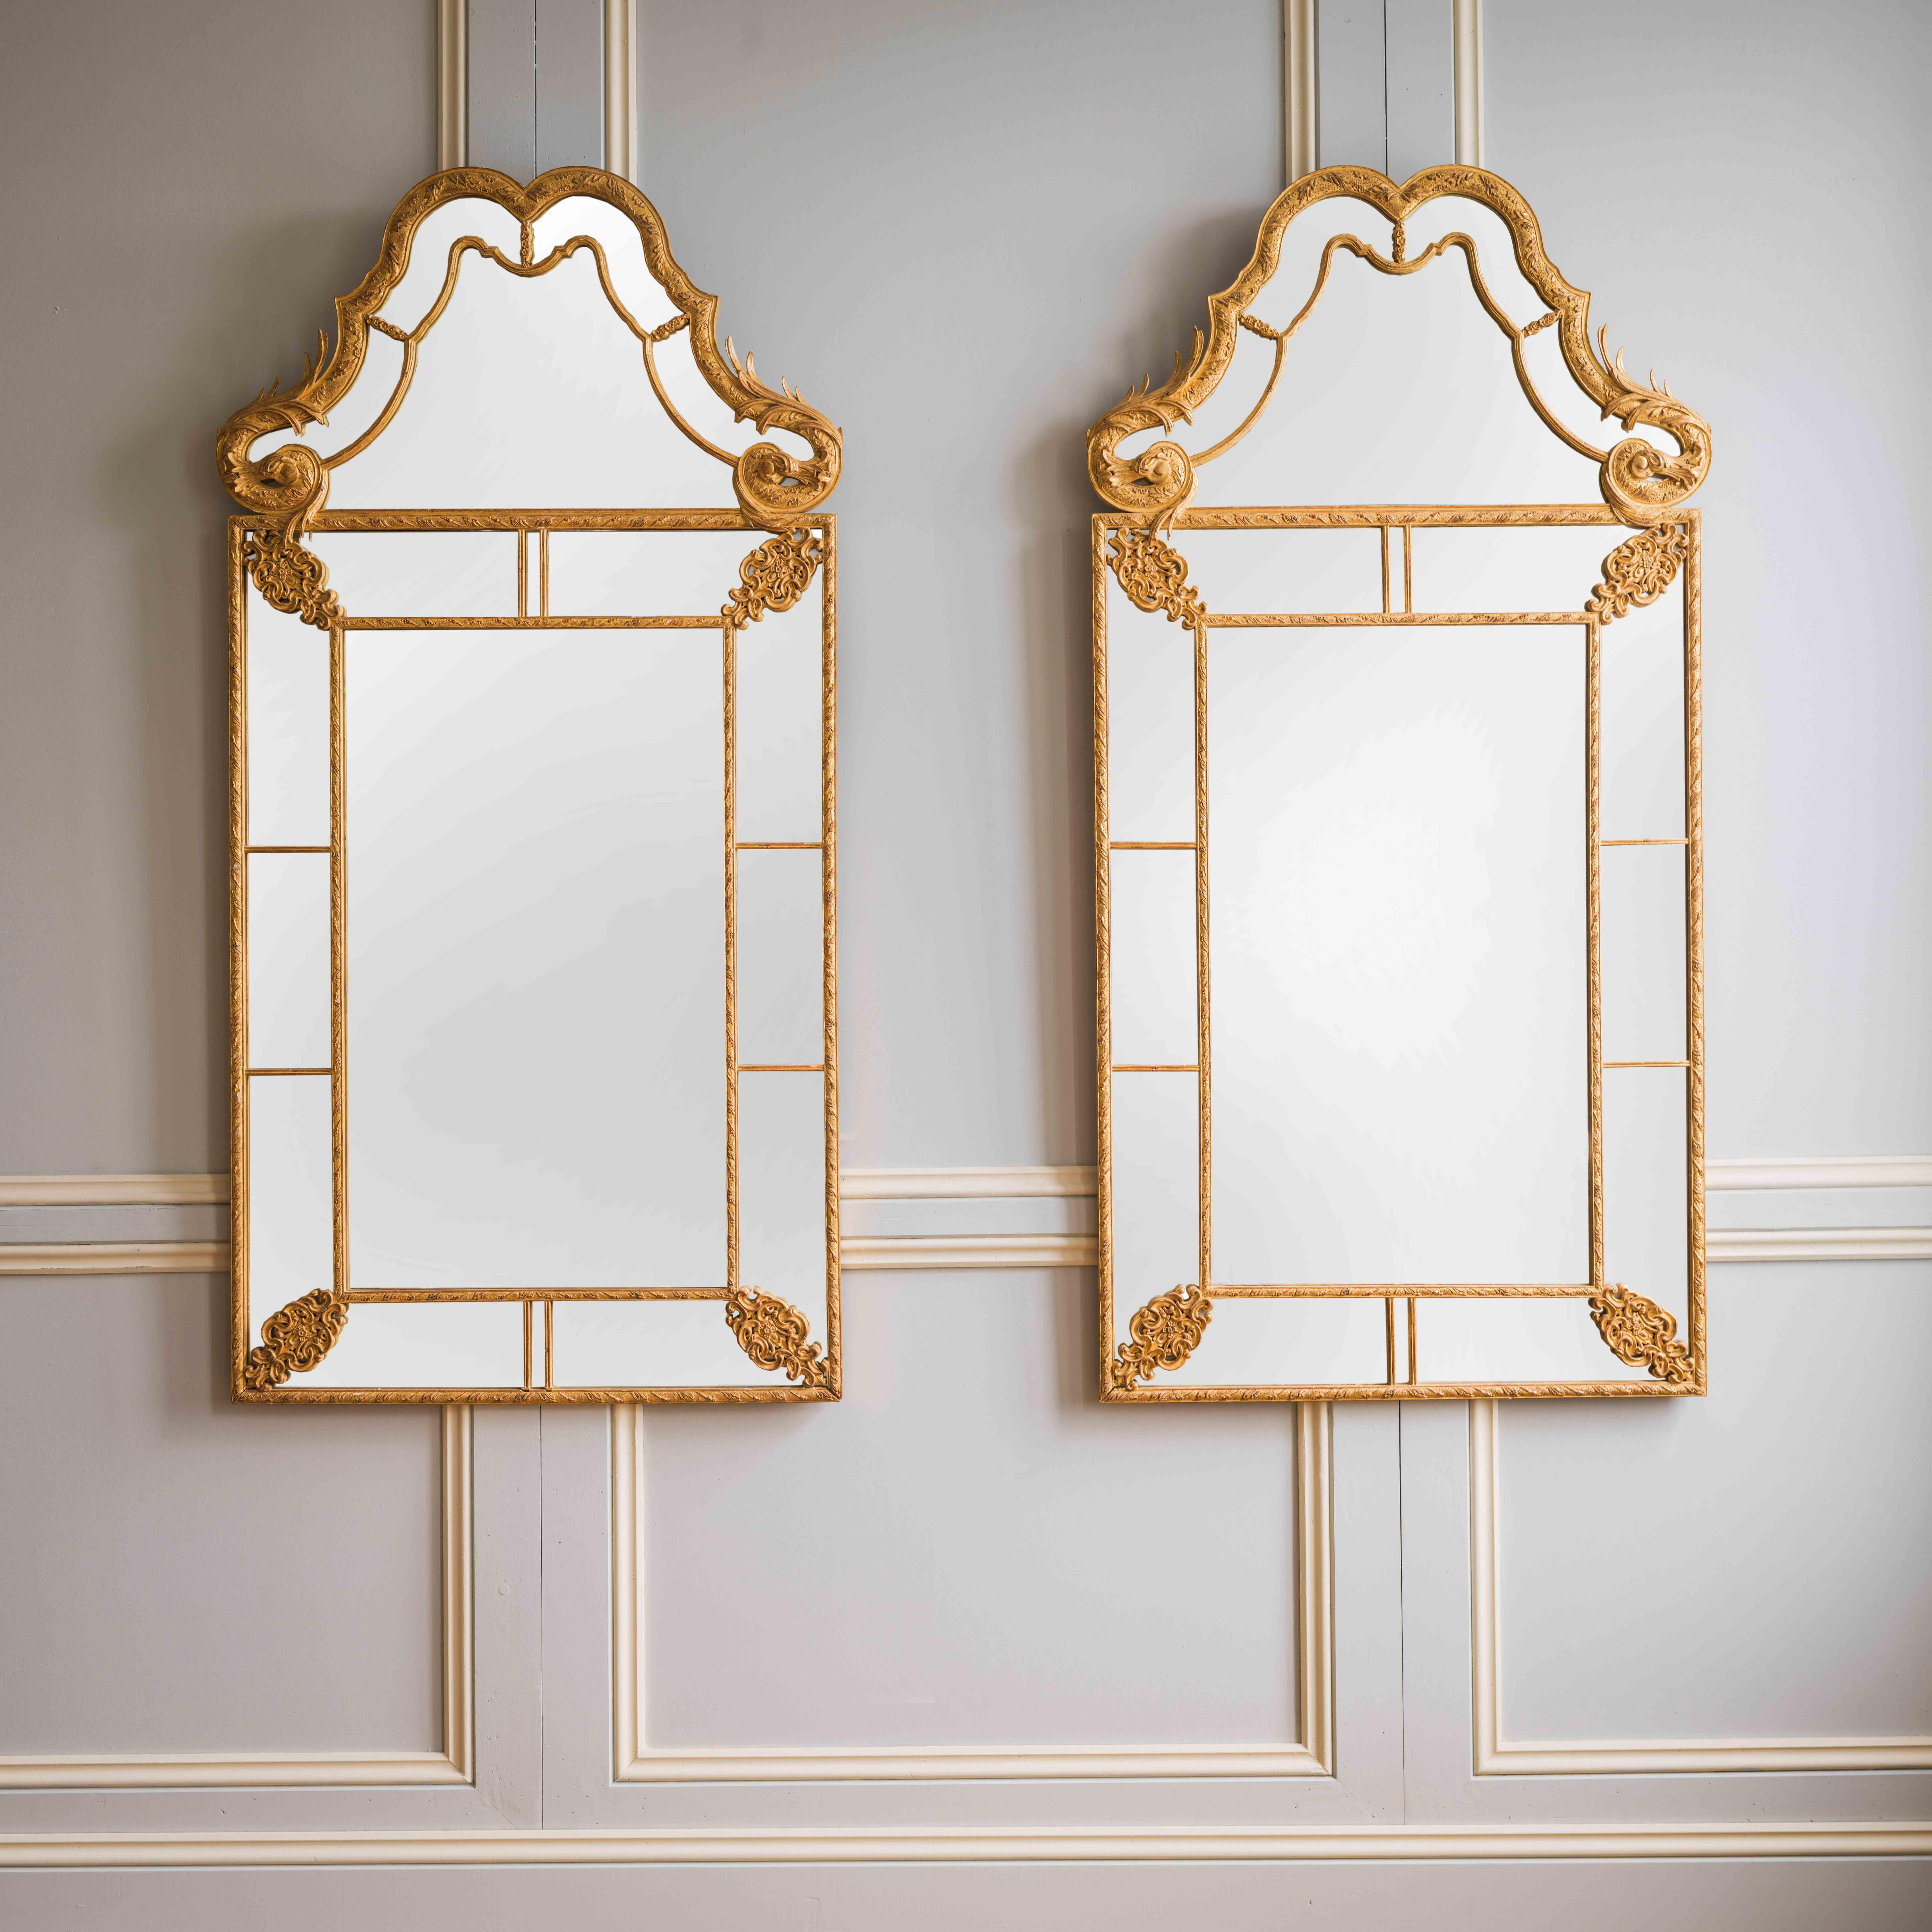 Hand carved, Georgian Style Parclose Mirrors, Giltwood finish.
